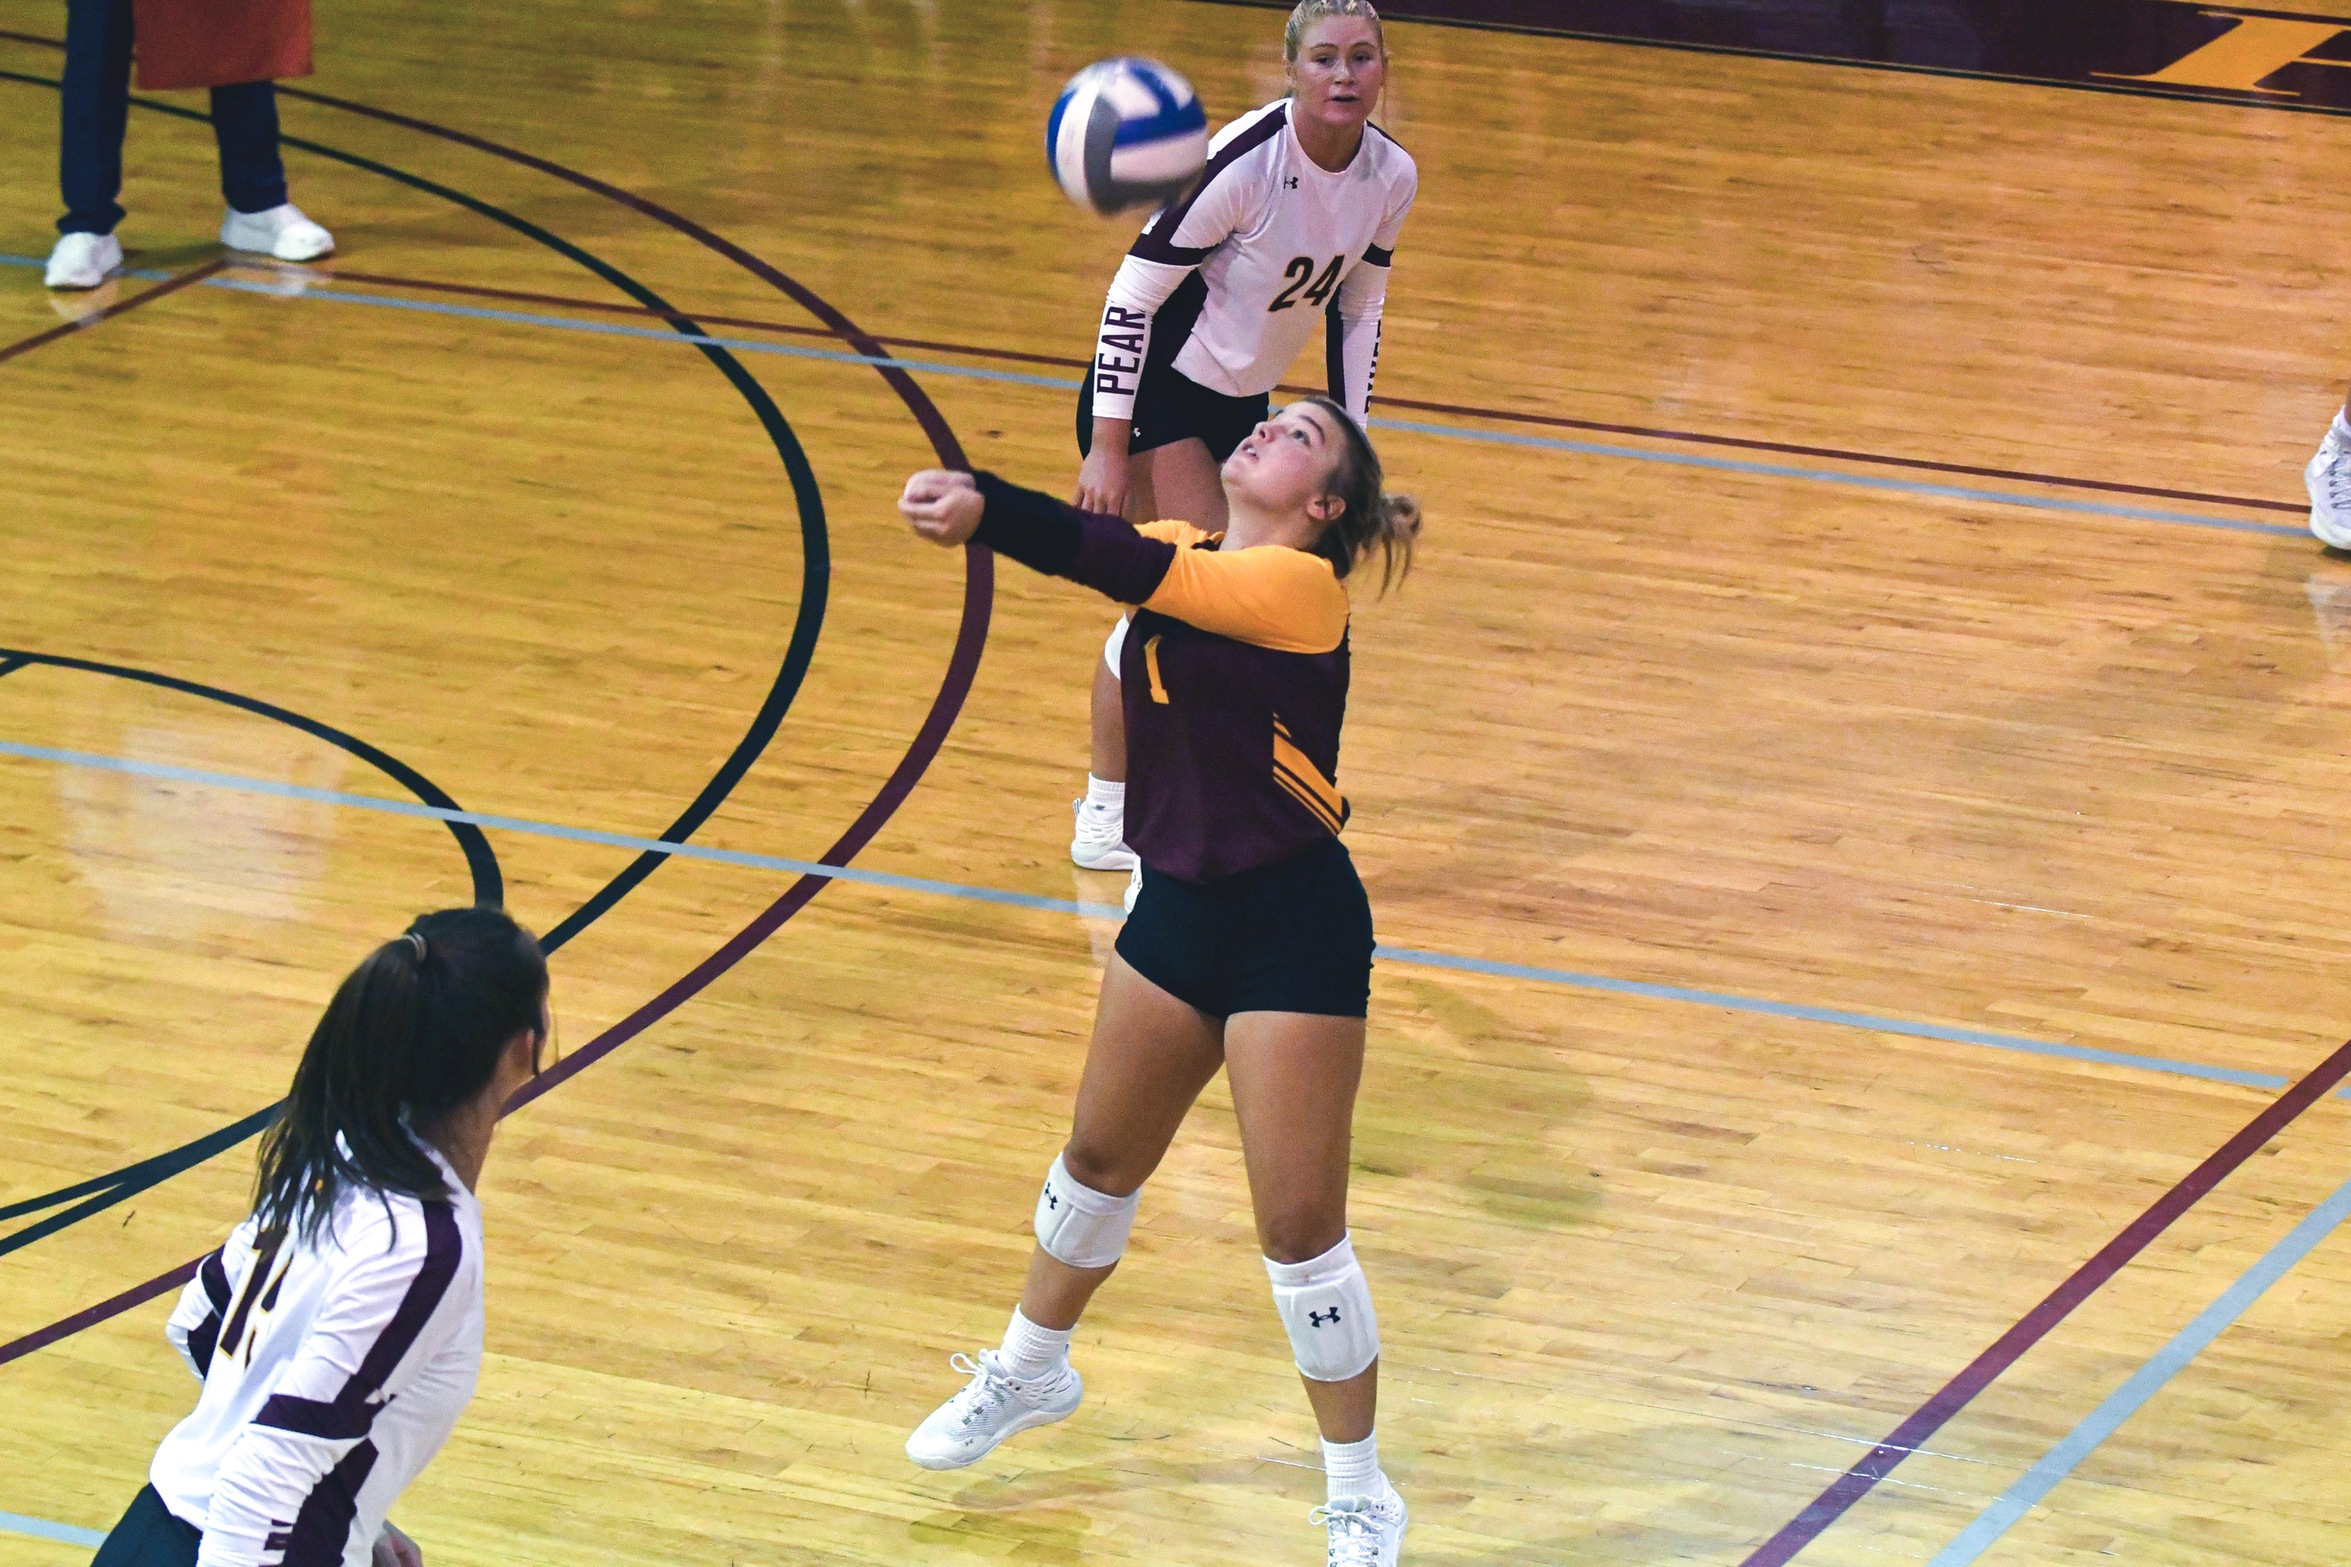 Gritty performance leads PRCC to comeback win